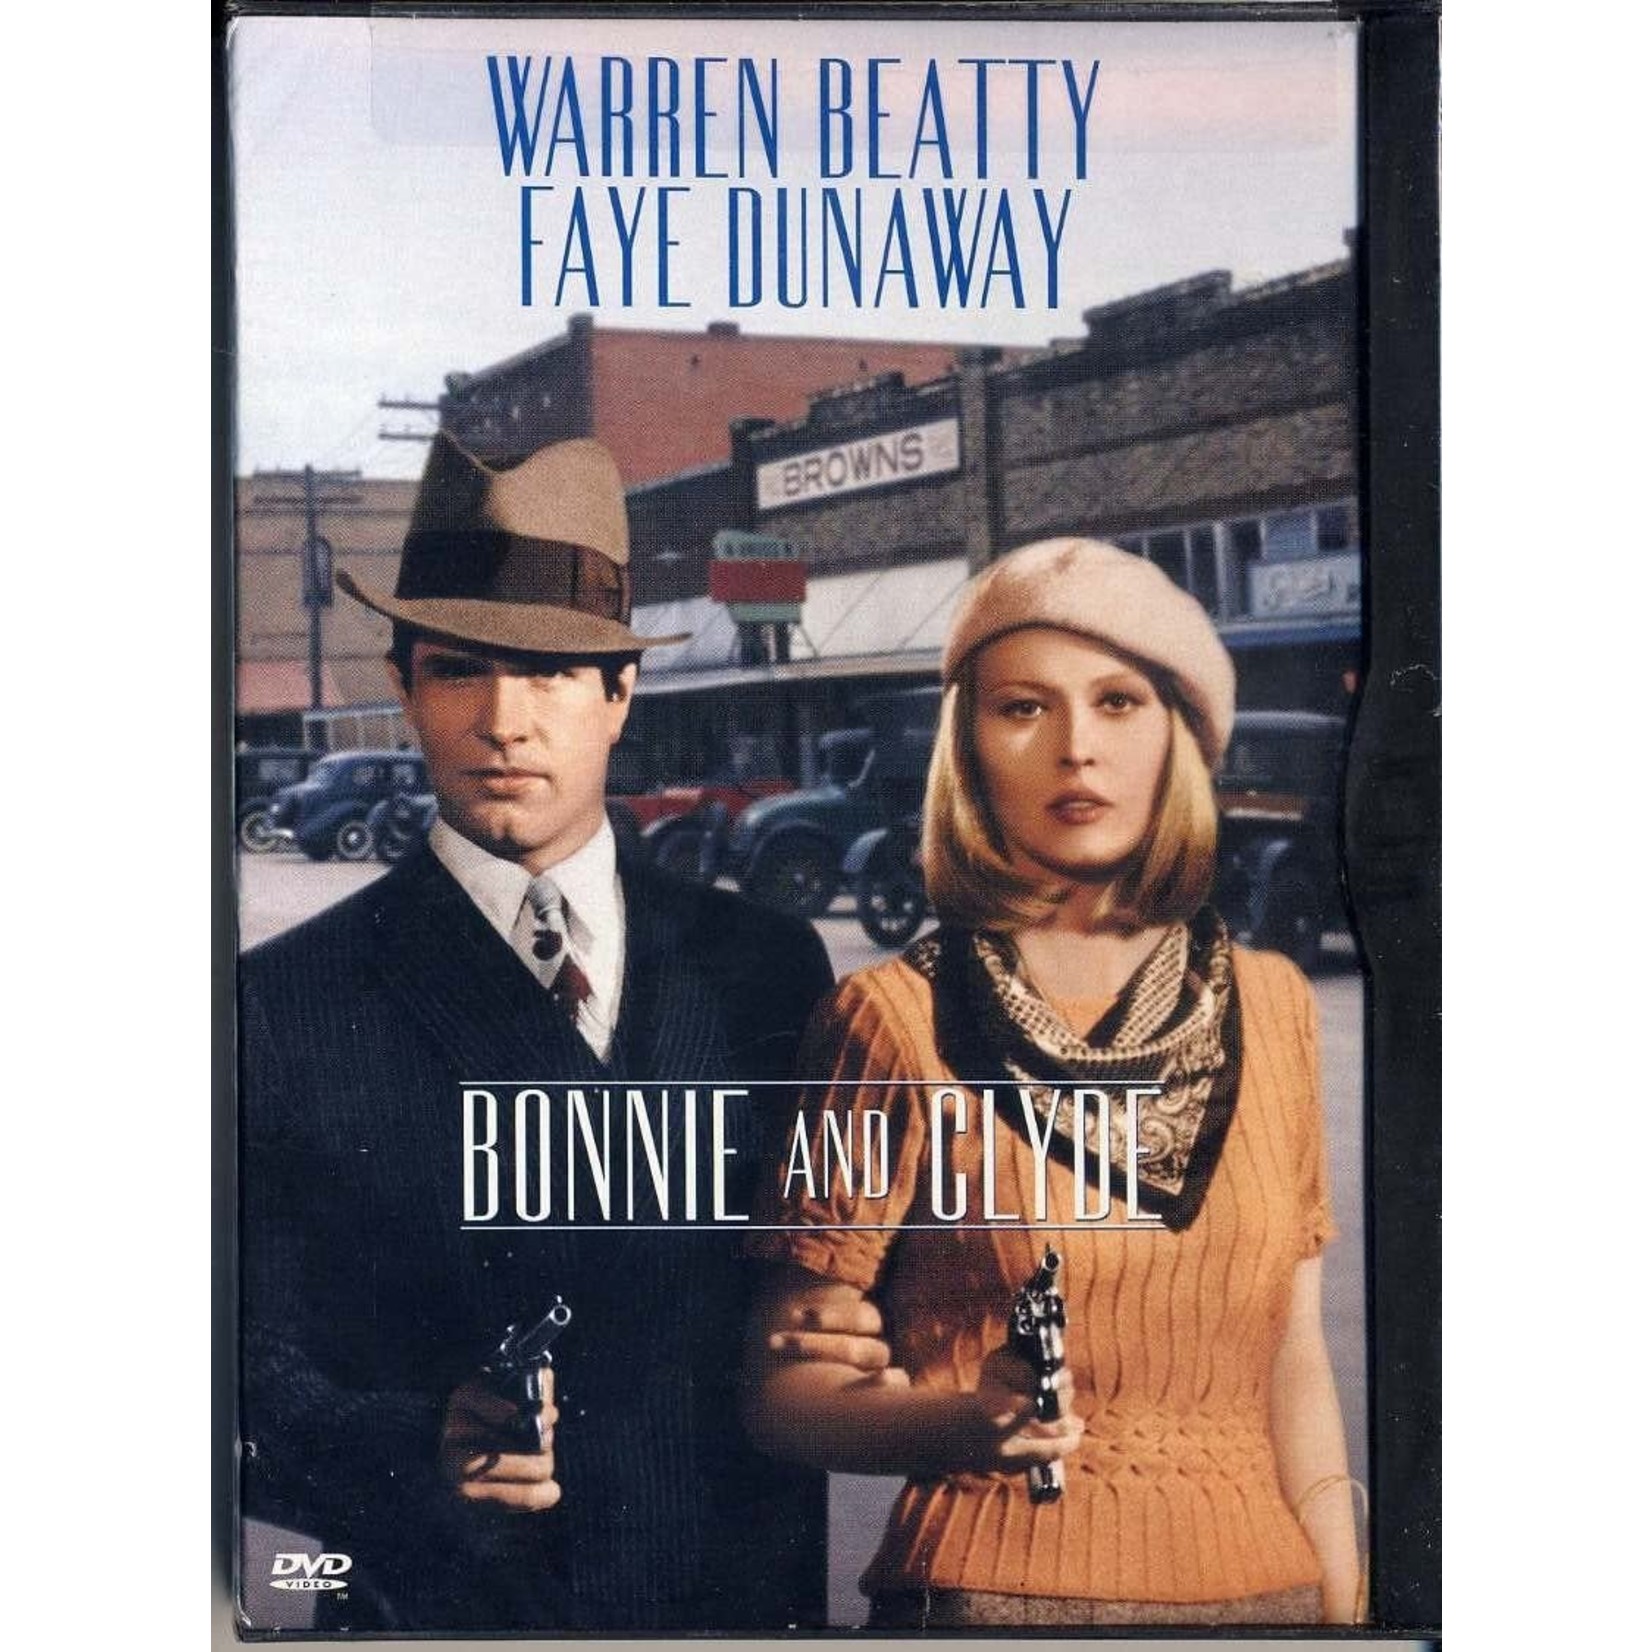 Bonnie And Clyde (1967) [USED DVD]